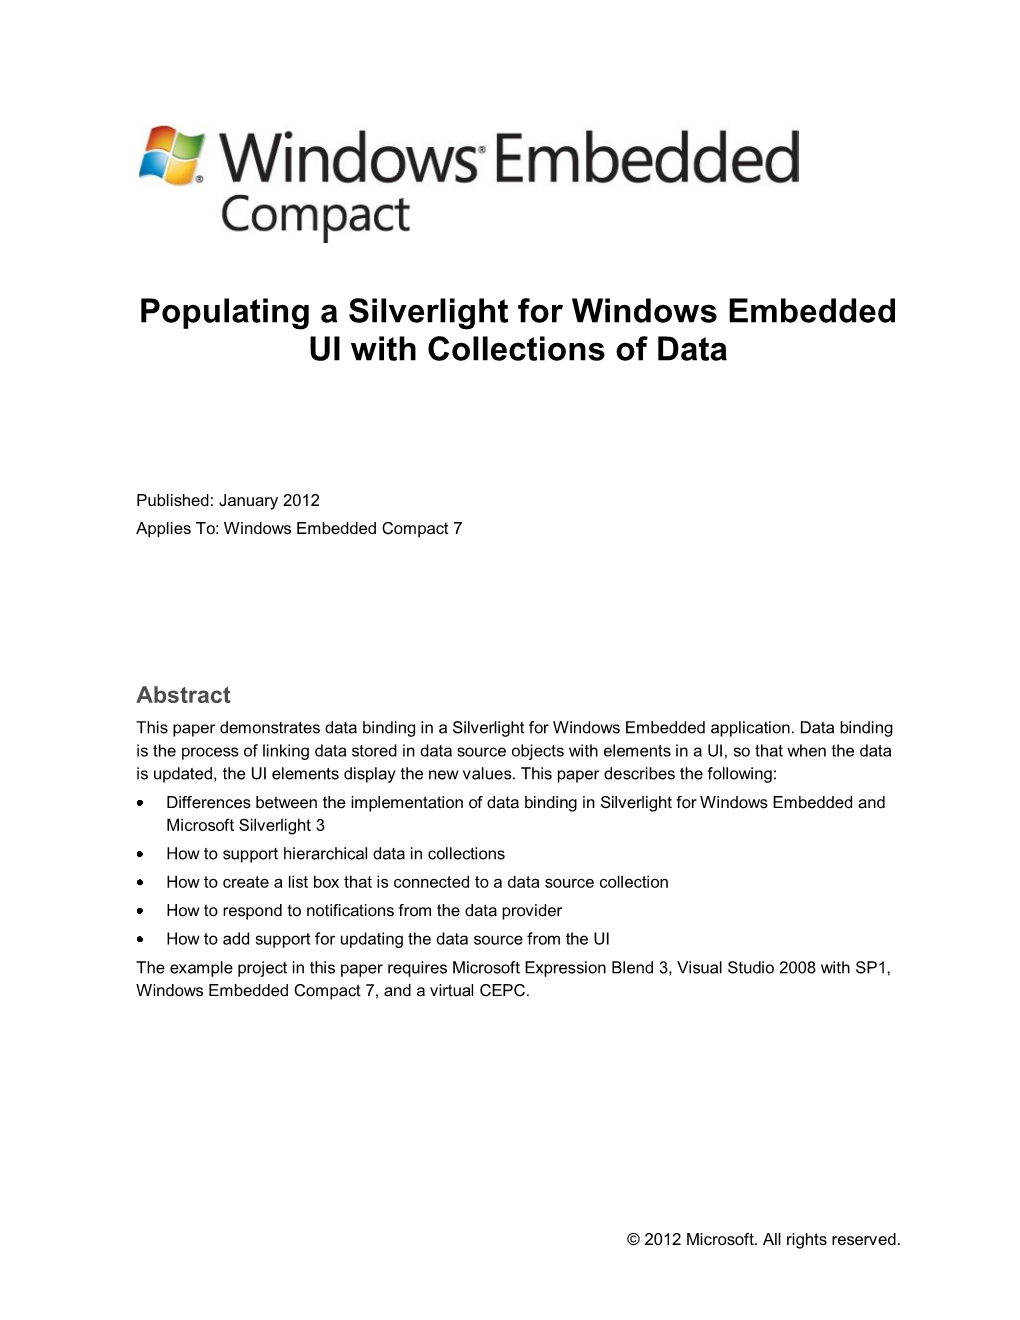 Populating a Silverlight for Windows Embedded UI with Collections of Data